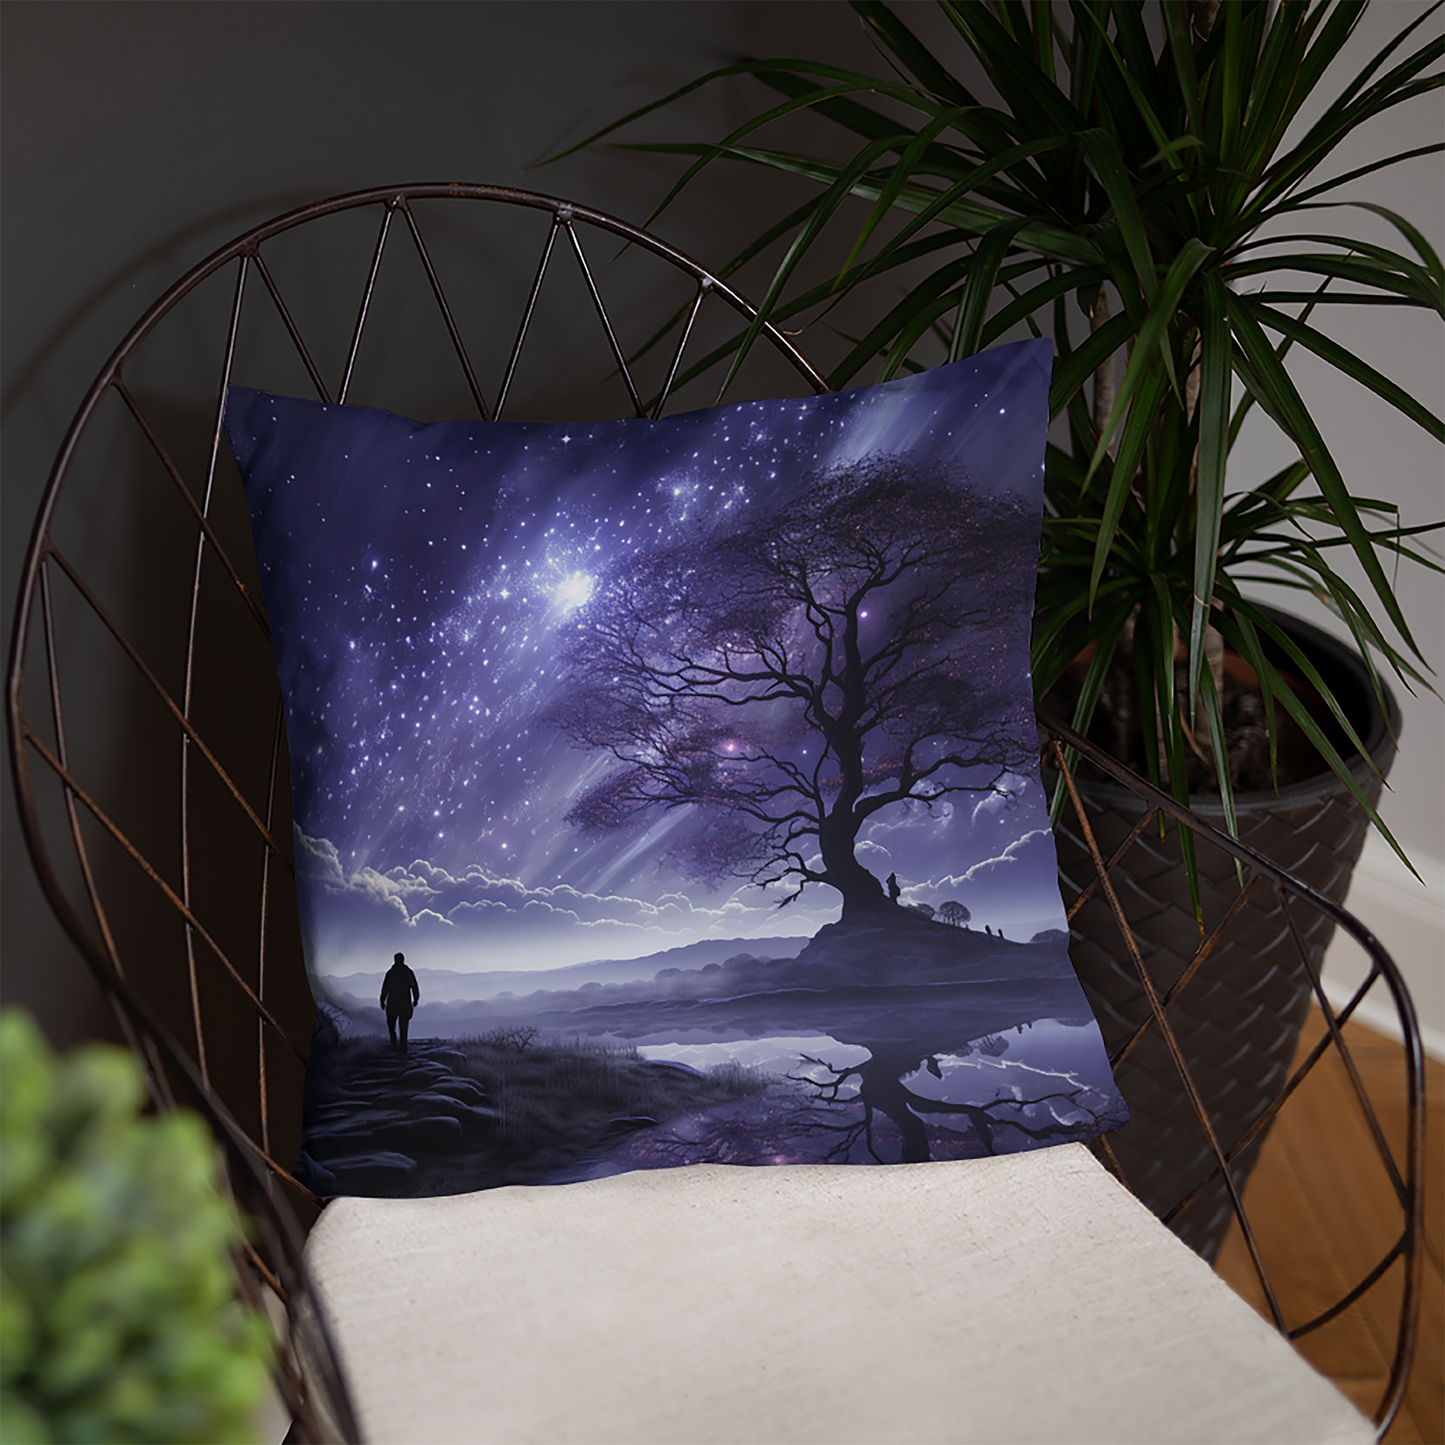 Space Throw Pillow Otherworldly Visions Serenity Polyester Decorative Cushion 18x18